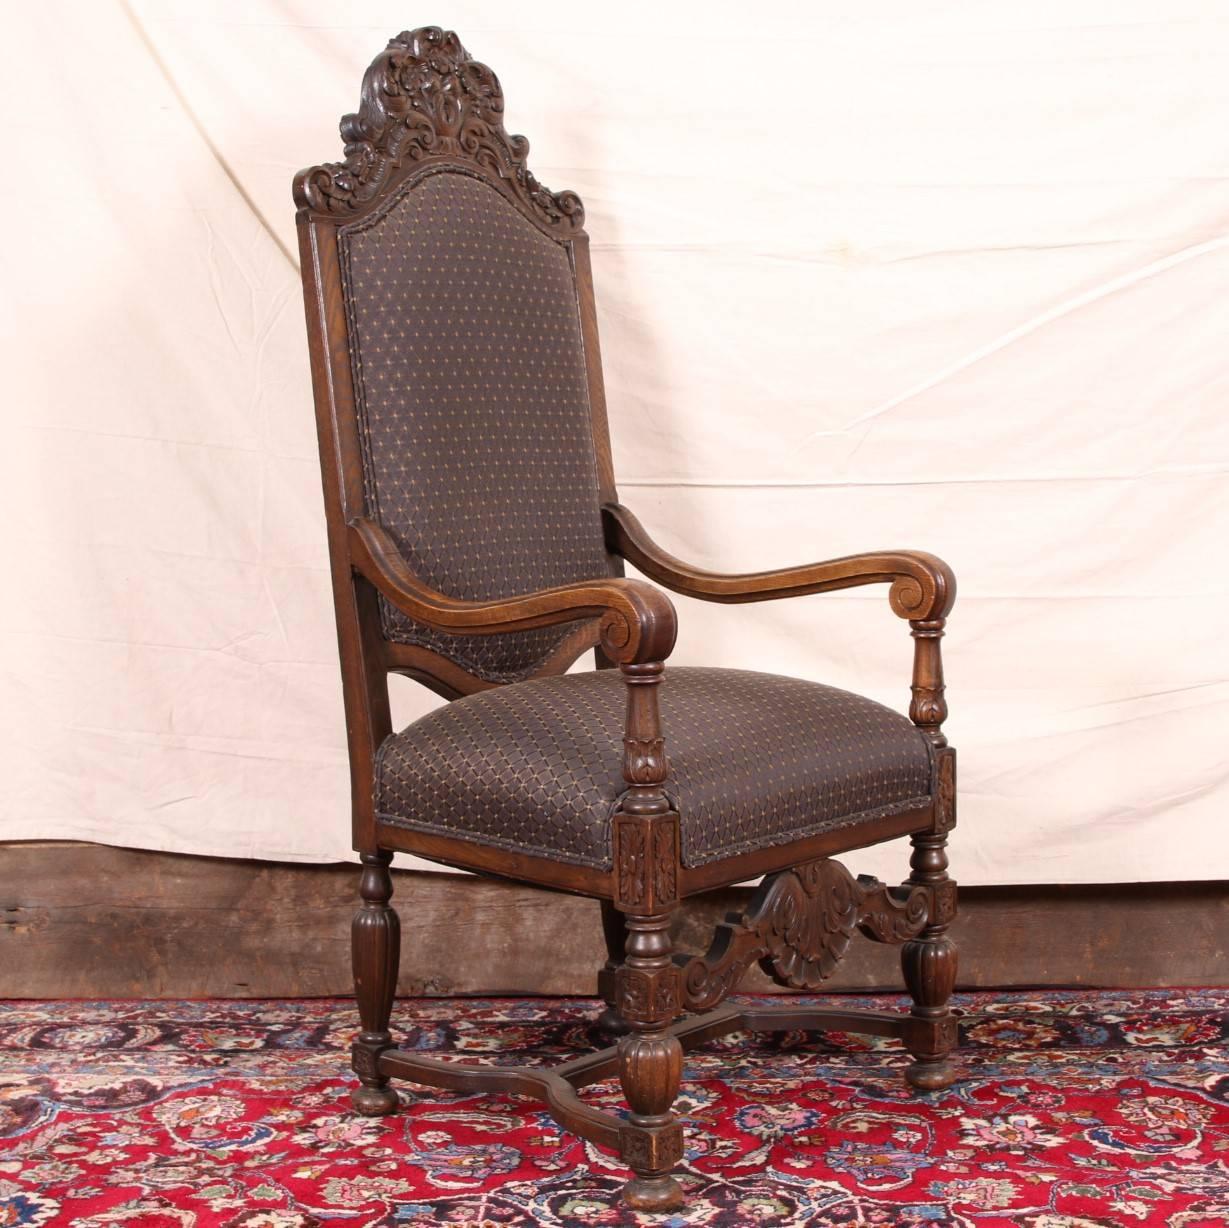 With a tall crest rail with foliate scrolls and scrolled arm ends with acanthus bases. The lower front stretcher with carved shell and acanthus leaves. Raised on three-part turned legs on bun feet, with a shaped H stretcher. In a dark grey and brown